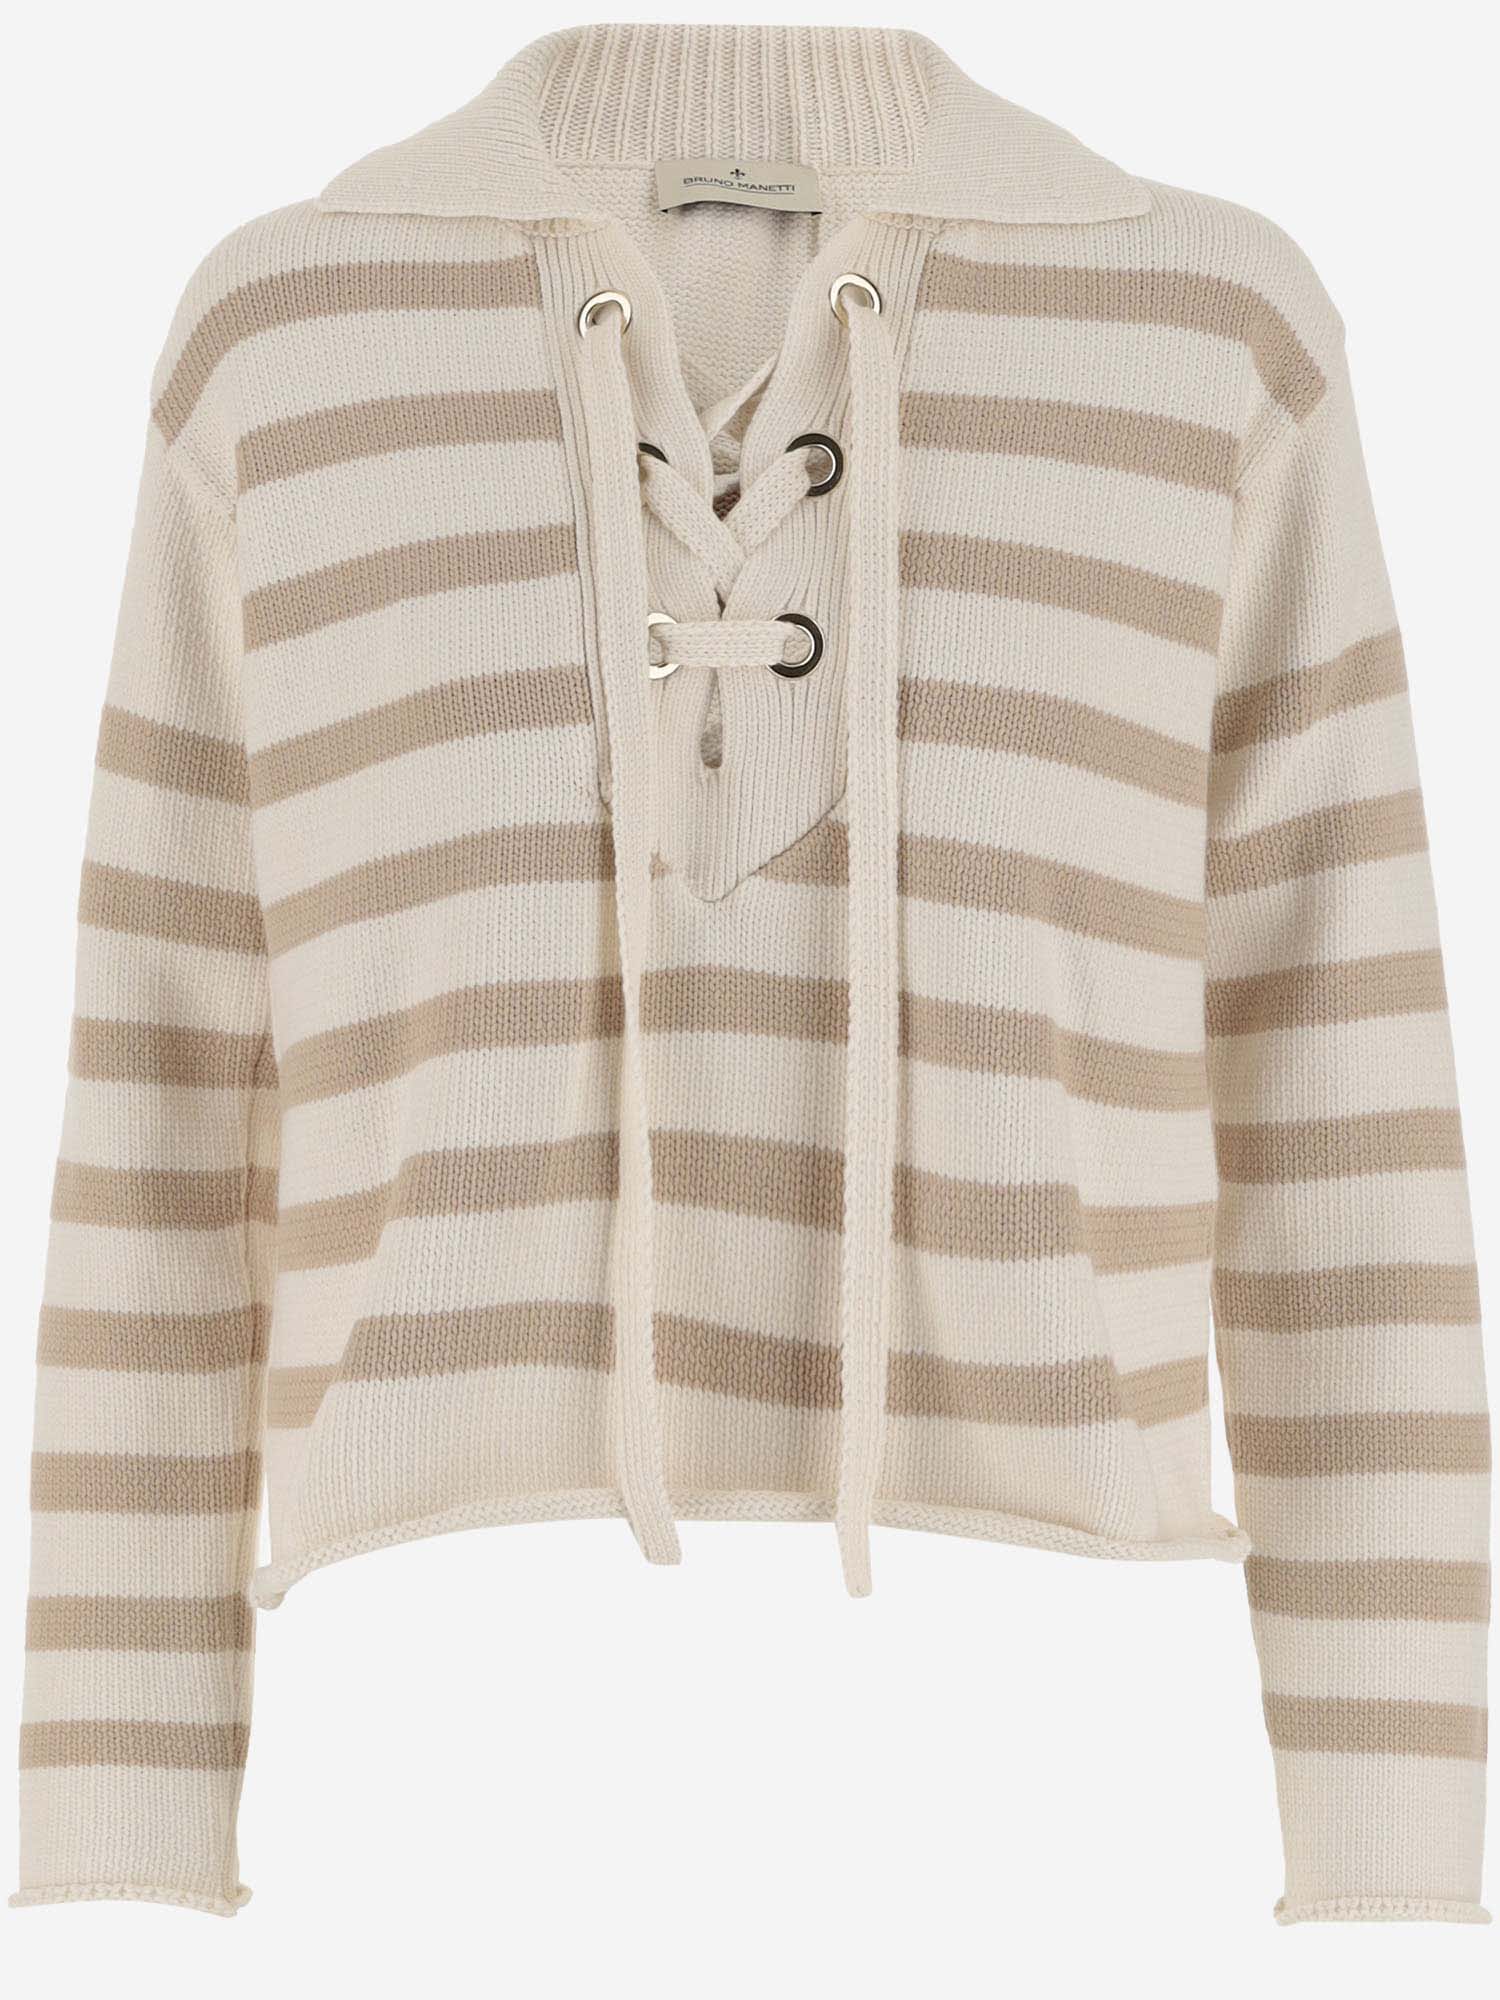 Cotton Blend Sweater With Striped Pattern